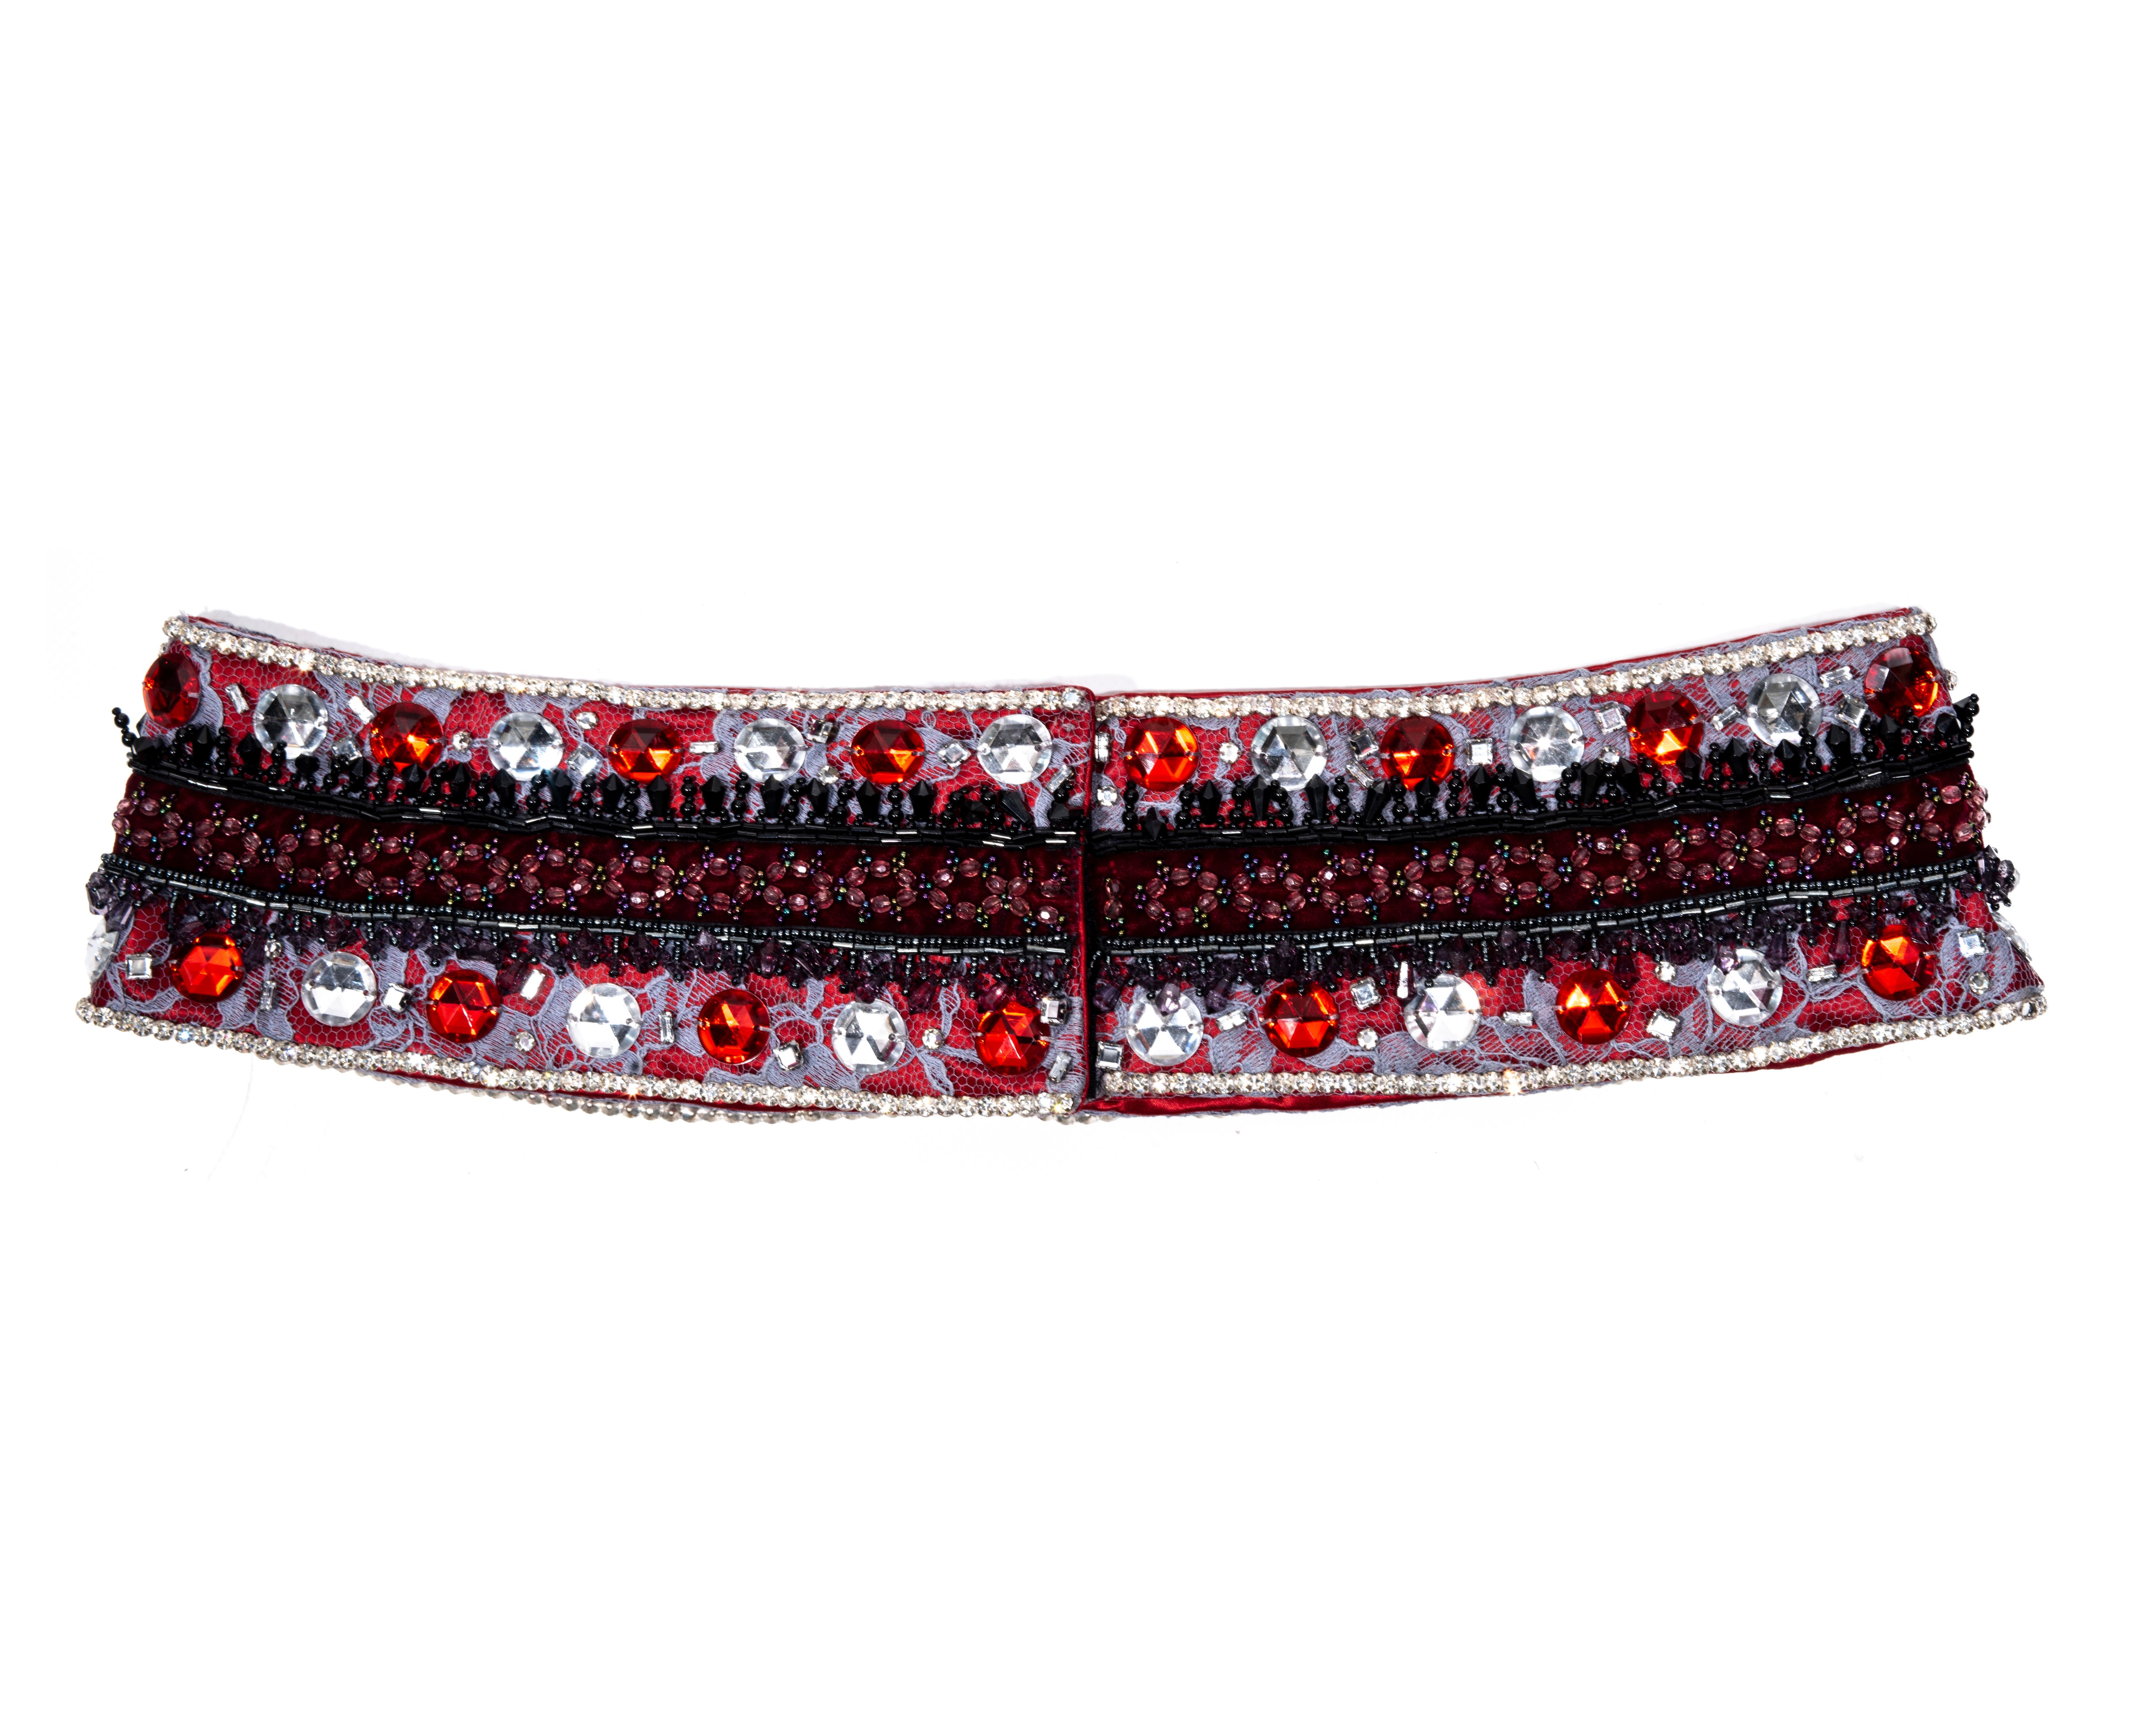 ▪ Dolce & Gabbana red silk and lace evening hip belt 
▪ Crystal trim 
▪ Purple lace overlay 
▪ Large faceted crystals 
▪ Allover embellished with beads
▪ Velcro closure 
▪ IT 40 - FR 36 - UK 8
▪ Fall-Winter 1999
▪ 100% Silk